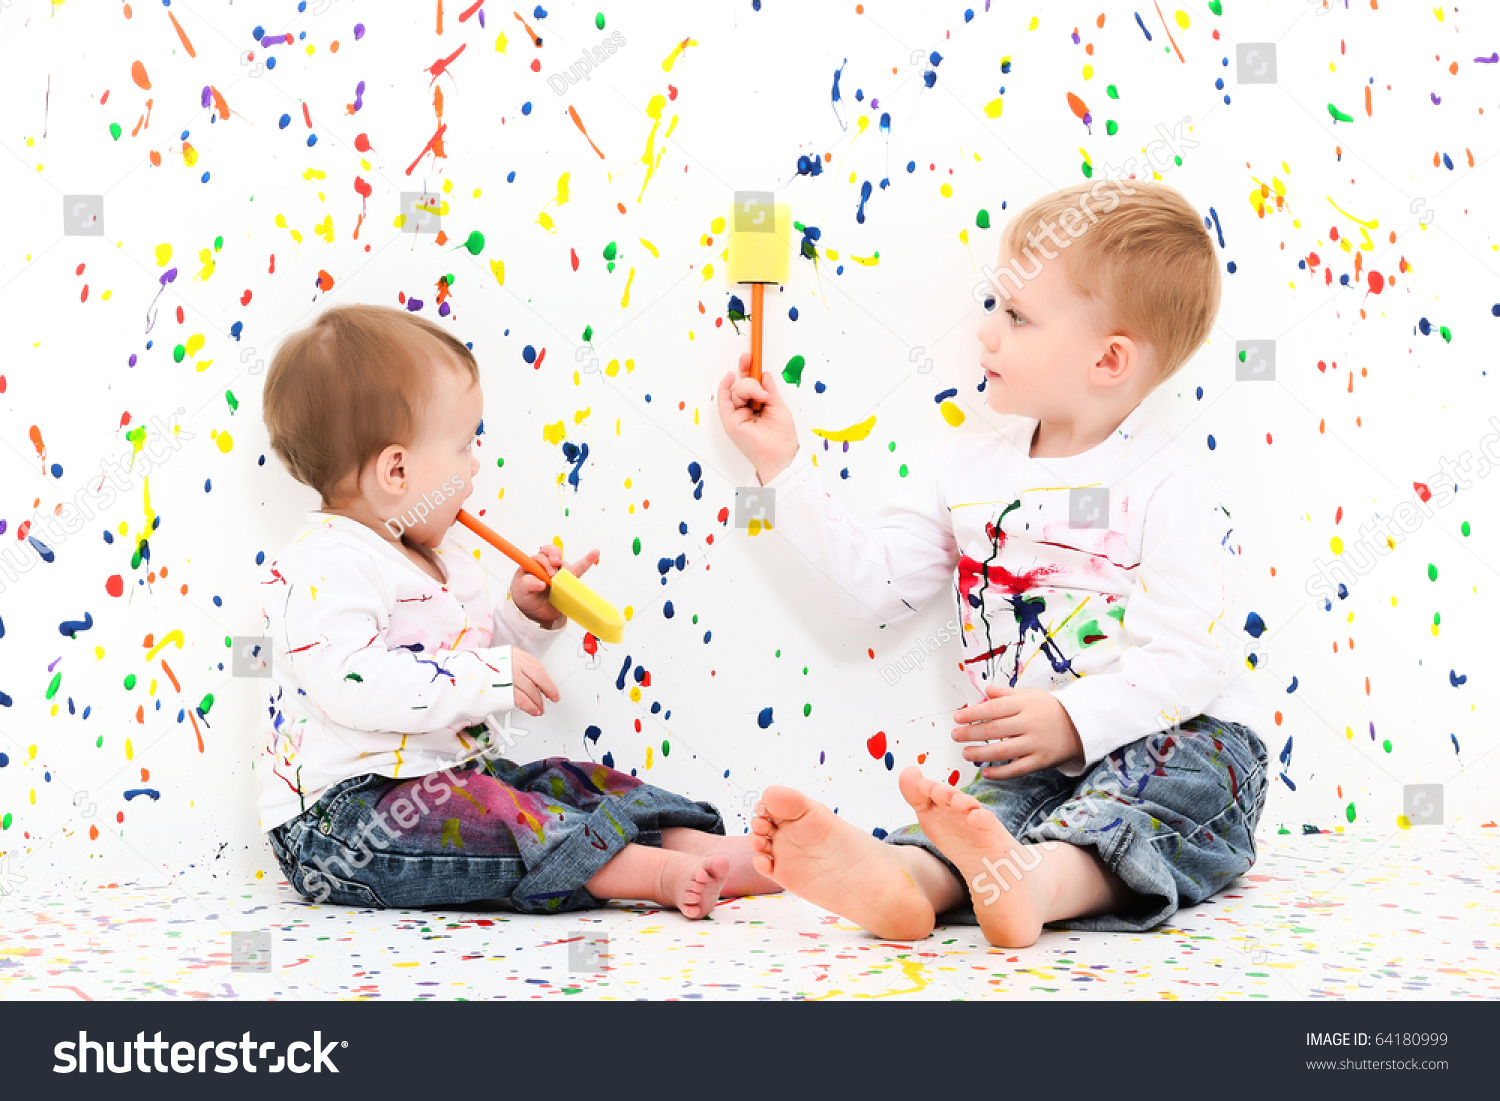 Adorable Brother And Sister Toddlers Covered In Paint On ...